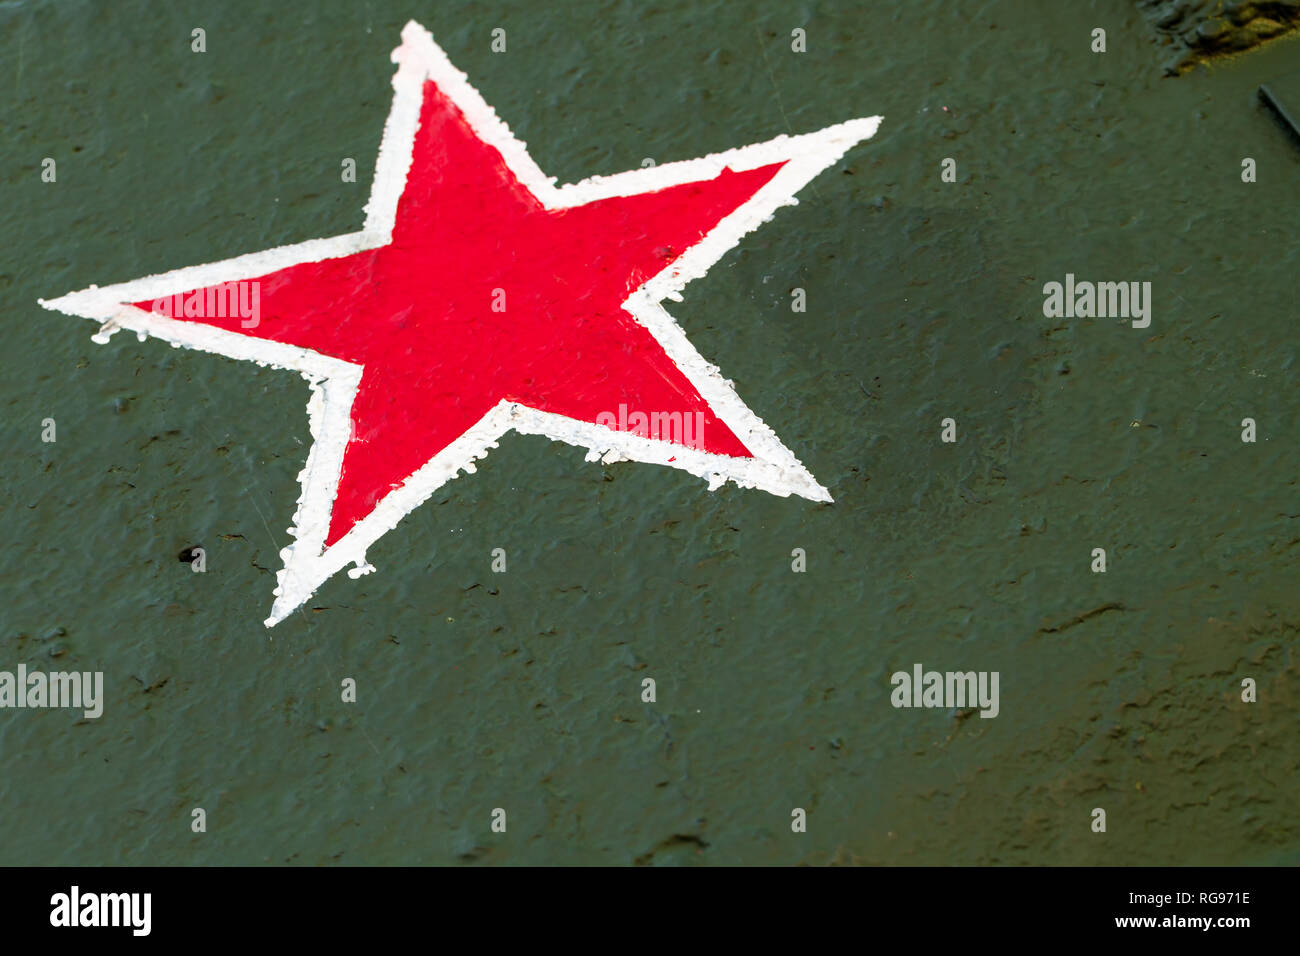 Red star on green steel plate. Sign of Soviet Workers and Peasants Red Army on tank body from World War II period Stock Photo